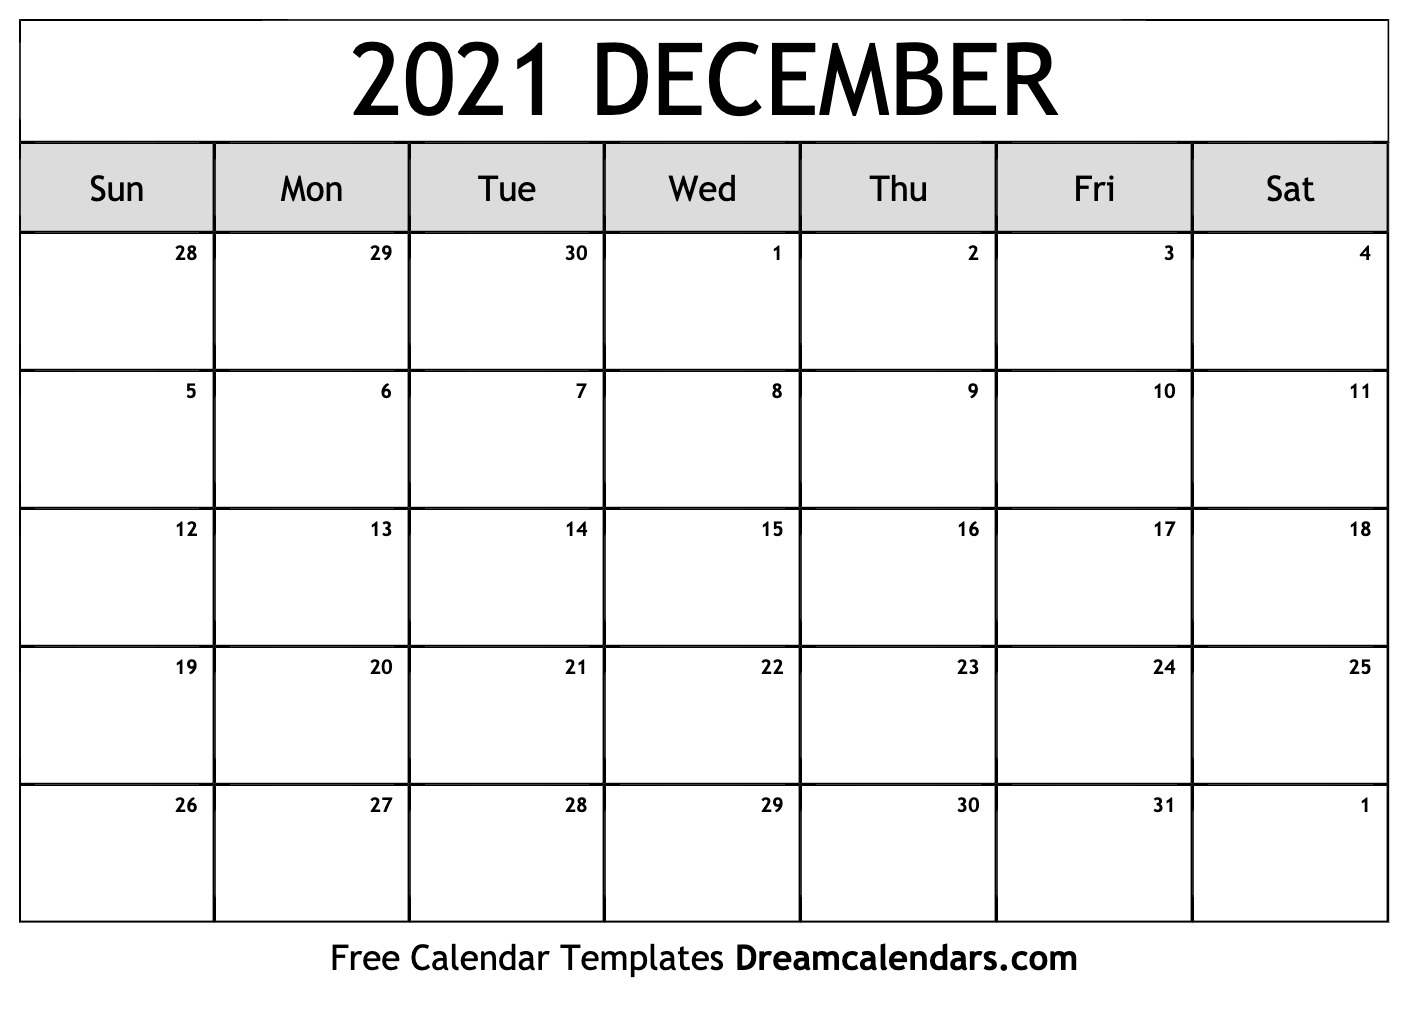 December 2021 Calendar Free Printable with Holidays and Observances